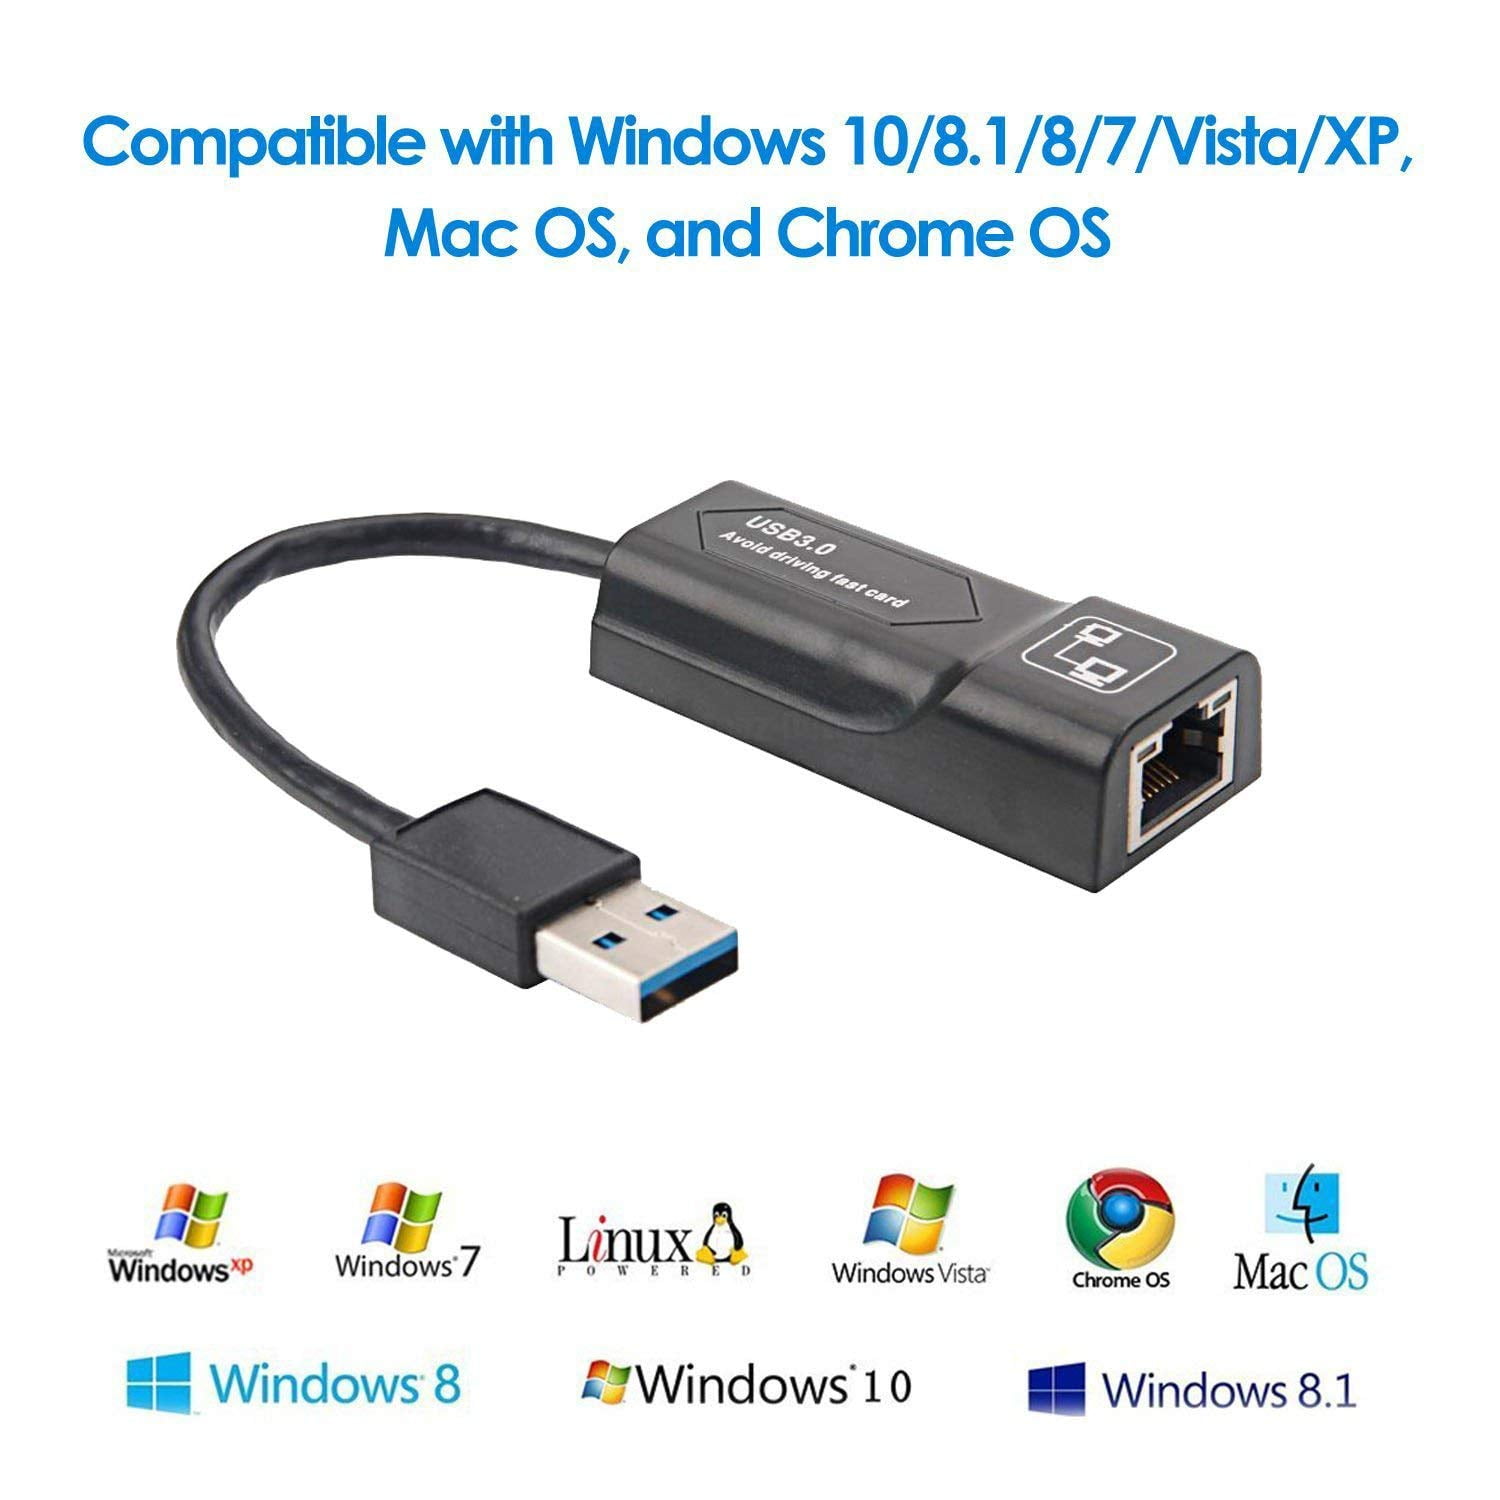 8.1 OS X/MAC OS Chrome OS XP,Vista 7 USB 3.0 to Ethernet Adapter 10/100/1000 LAN Network Adapter for Windows 10 8 Linux 